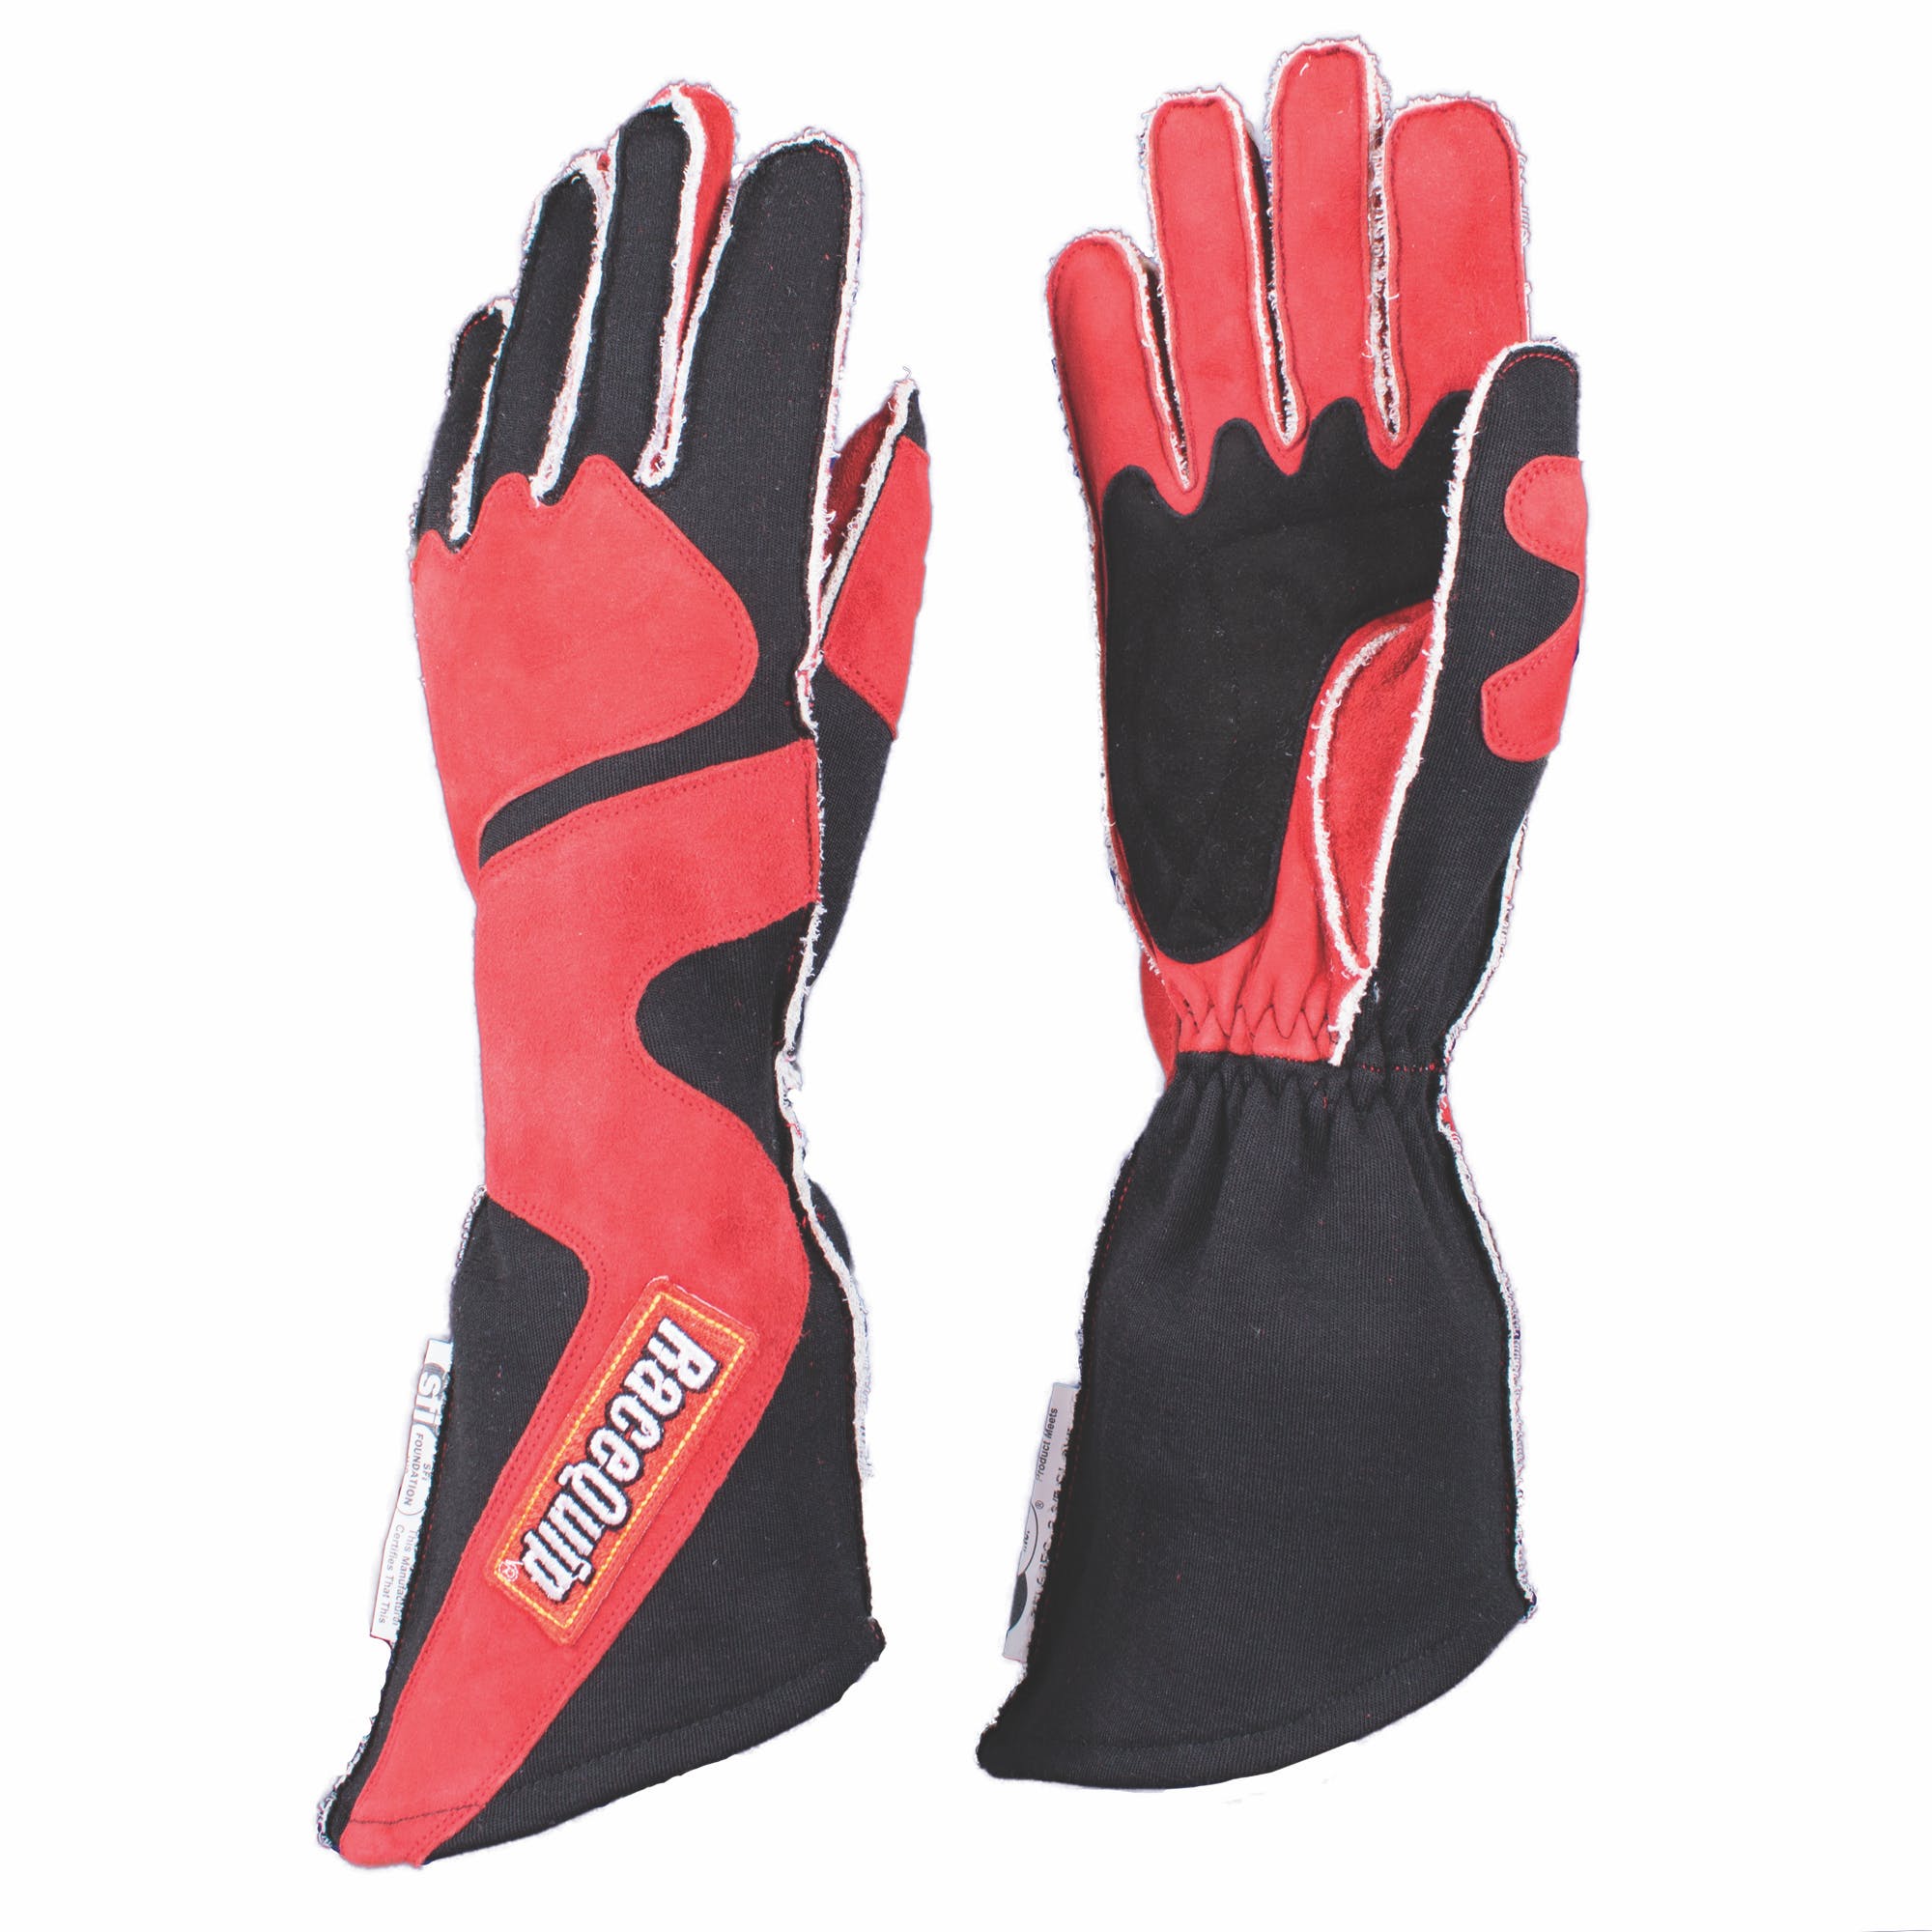 RaceQuip 359102 SFI-5 Out Seam Angle-Cut Gauntlet Racing Gloves (Red/Black, Small)